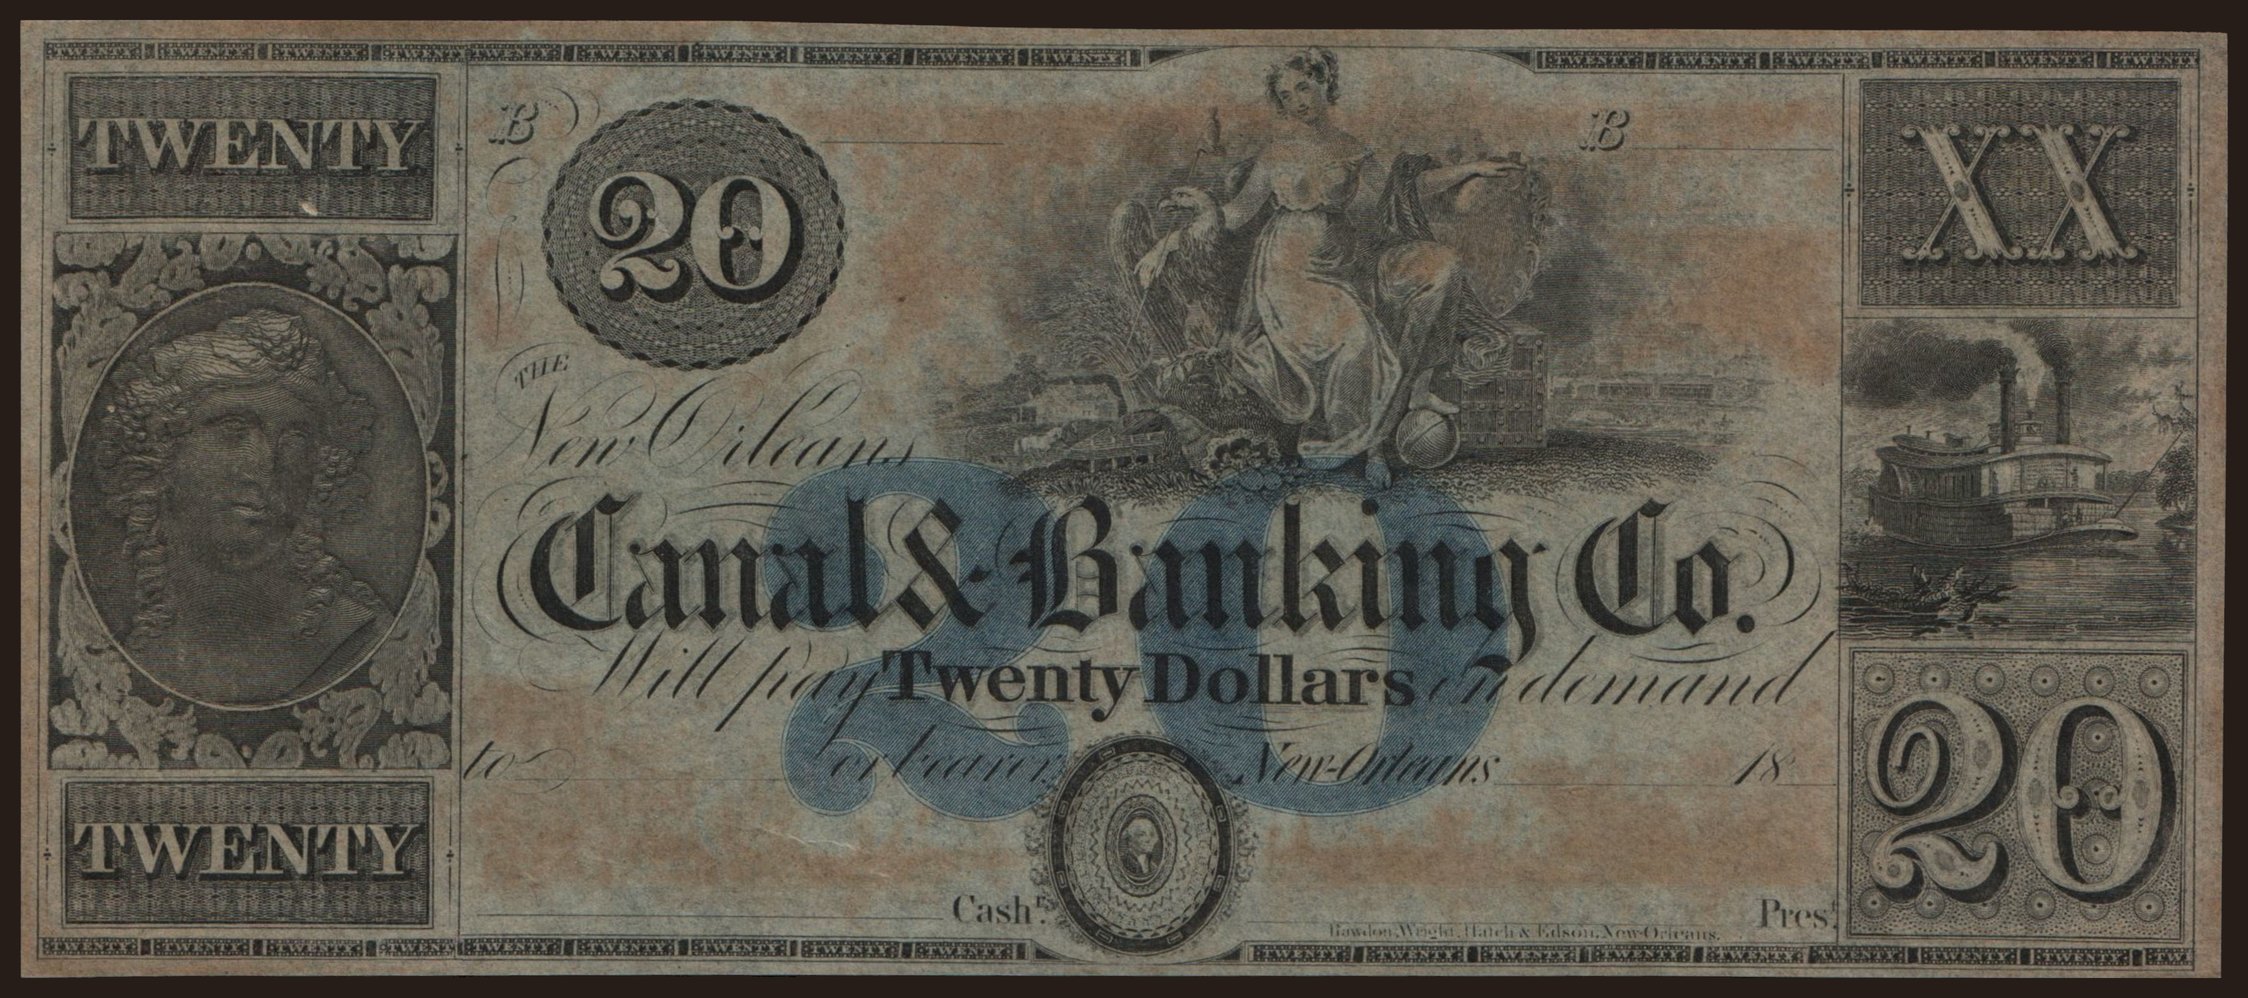 New Orleans/ Canal & Banking Co., 20 dollars, 18xx